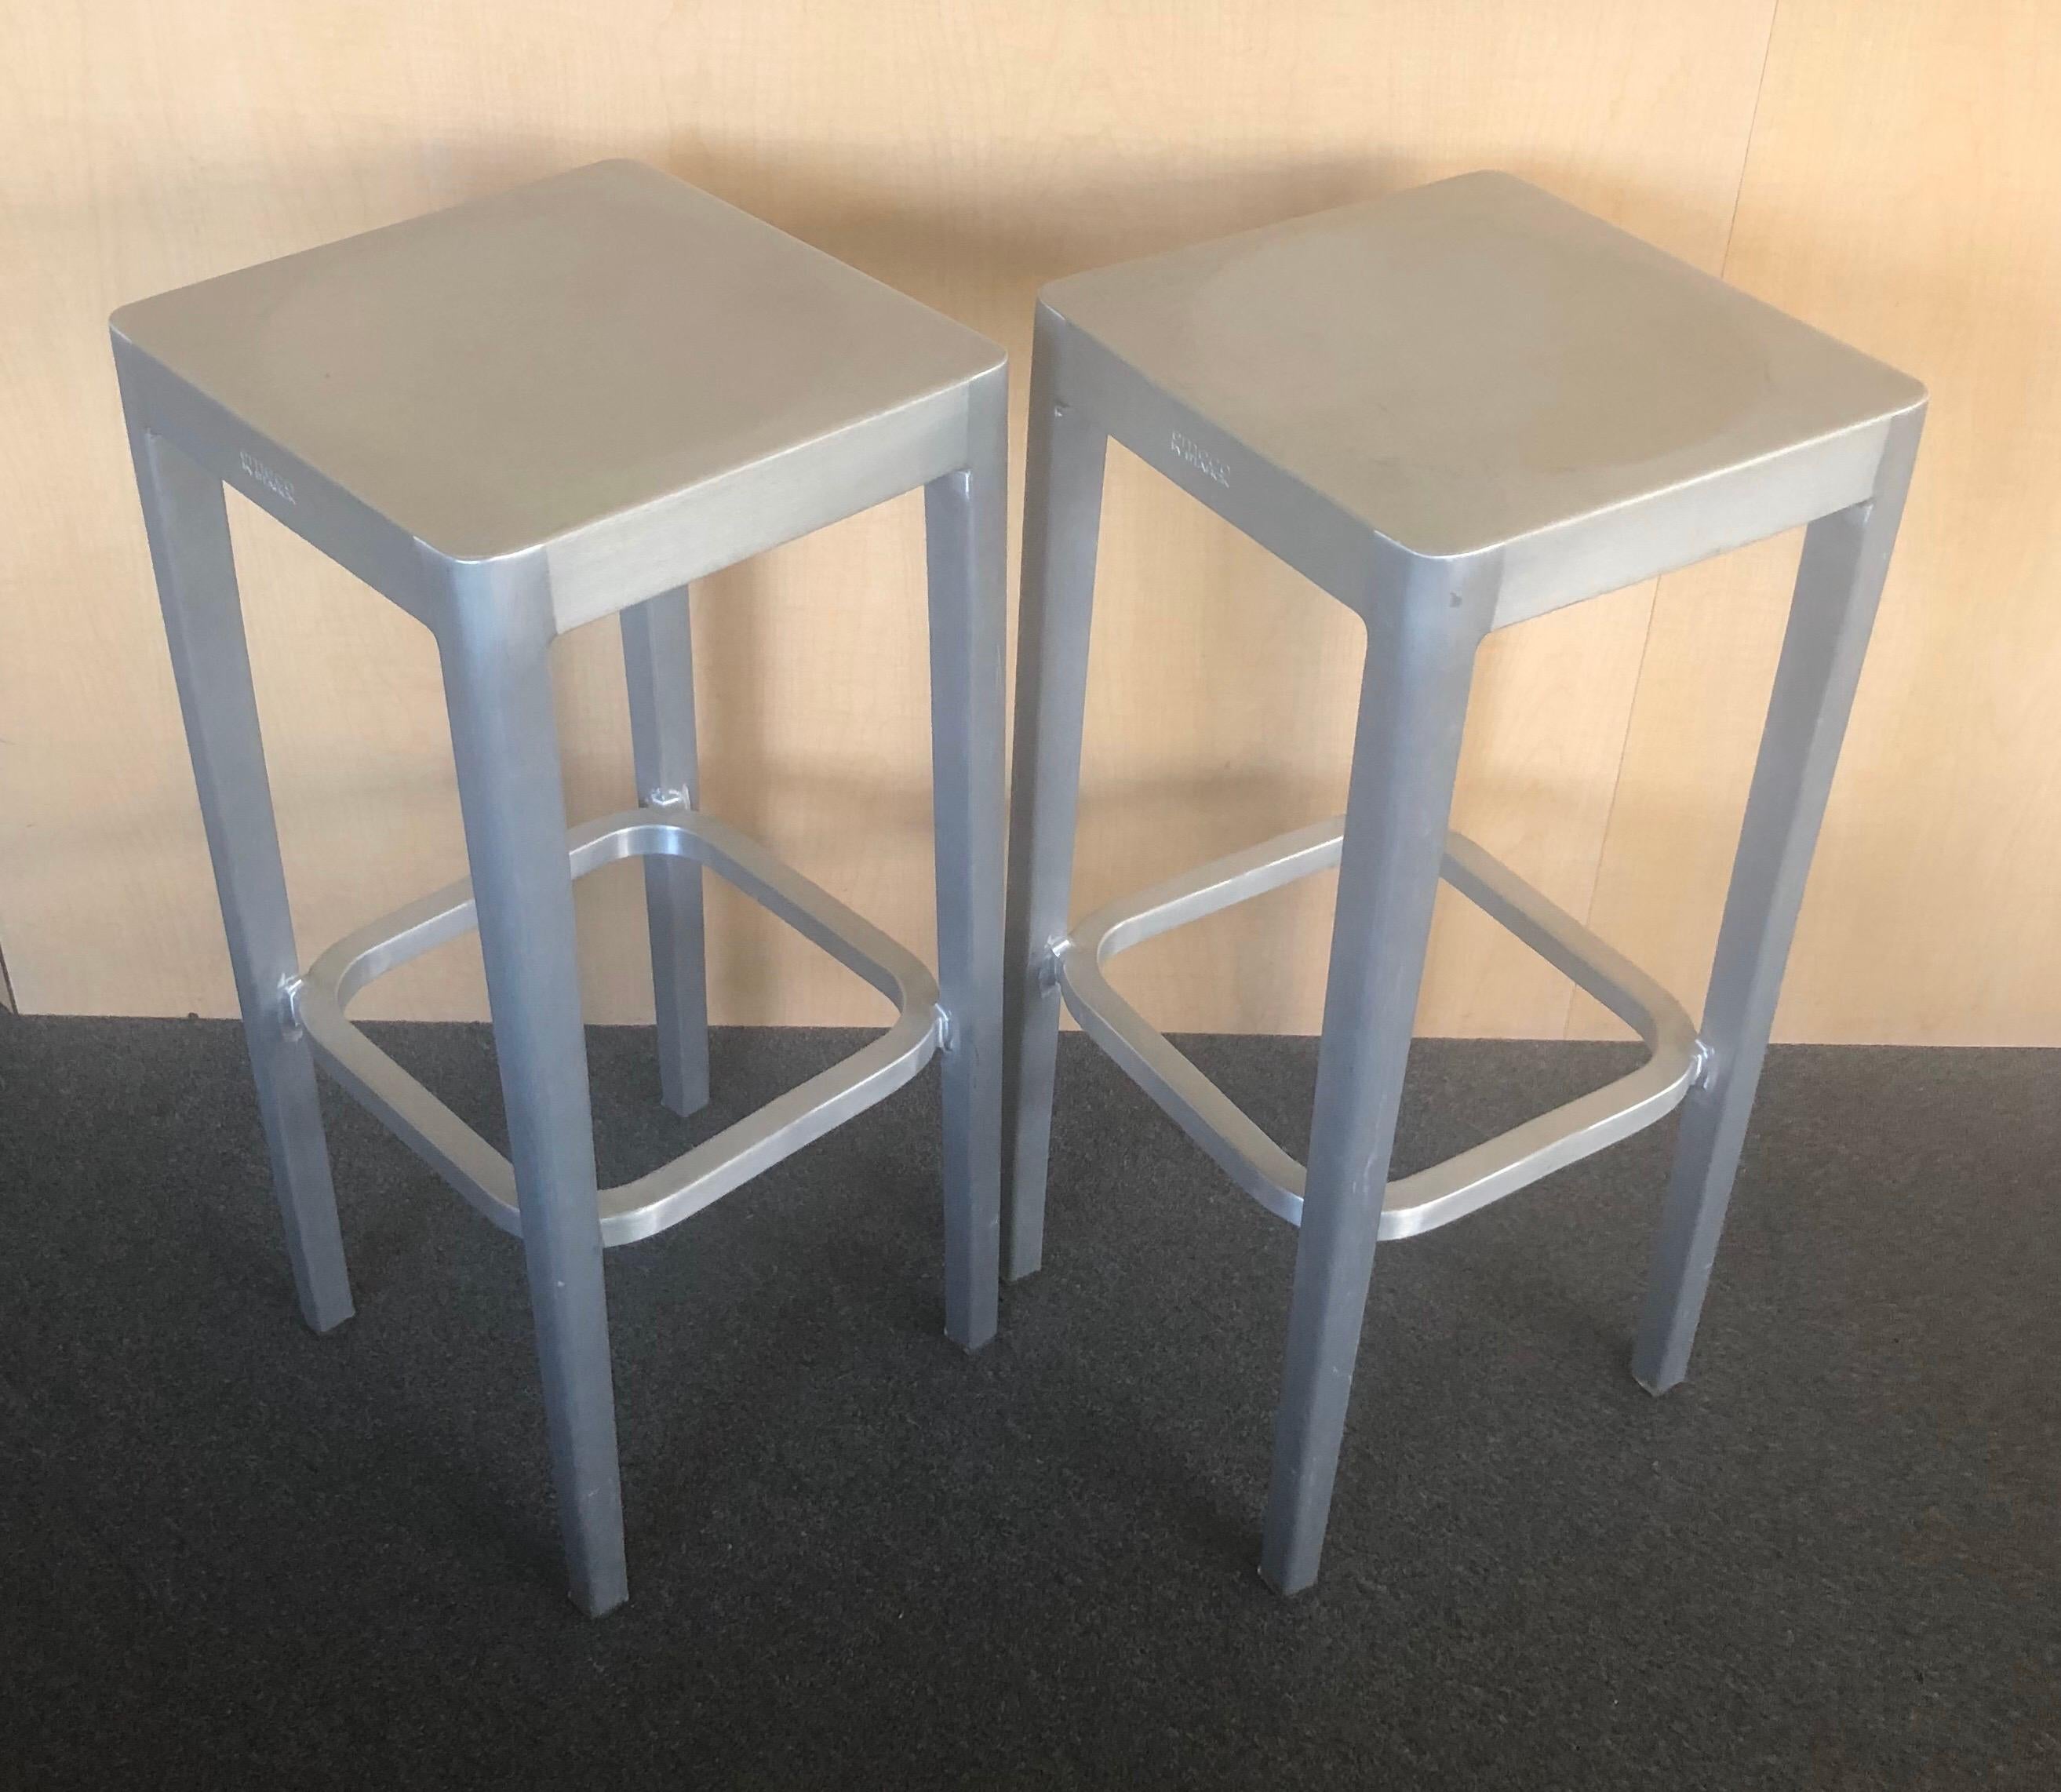 Sleek pair of brushed aluminum bar stools by Philippe Starck for Emeco, circa 1990s. Very sturdy and functional in very good vintage condition.